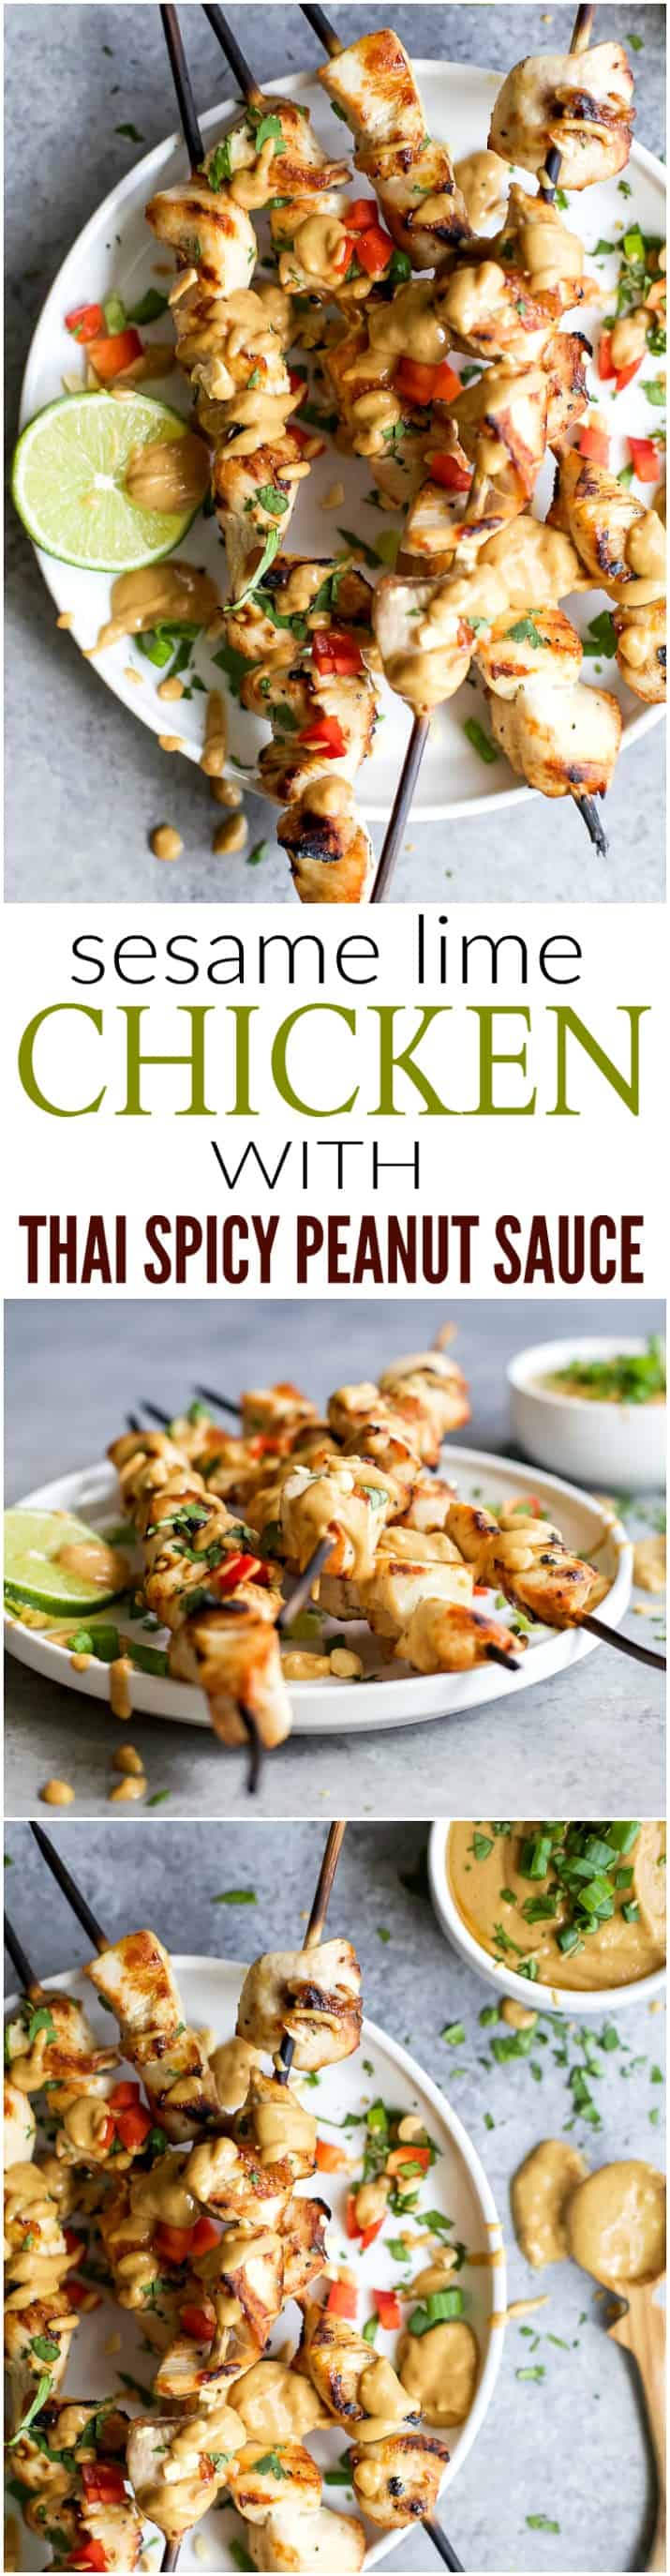 Multiple Images of Grilled Sesame Lime Chicken with Spicy Thai Peanut Sauce